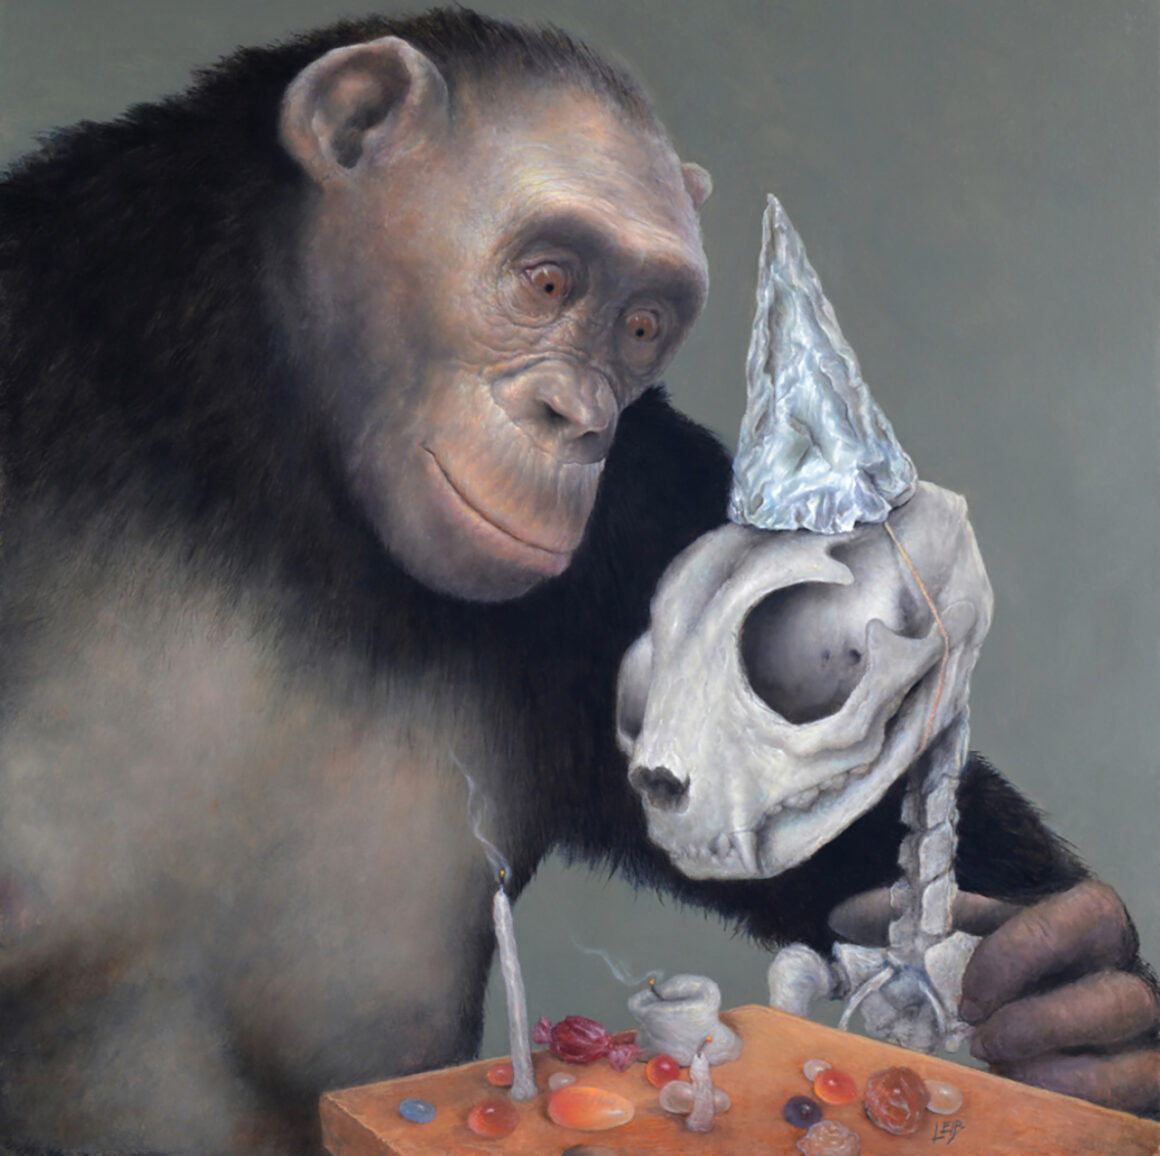 Hierachy the solo exhibition by Chris Leib